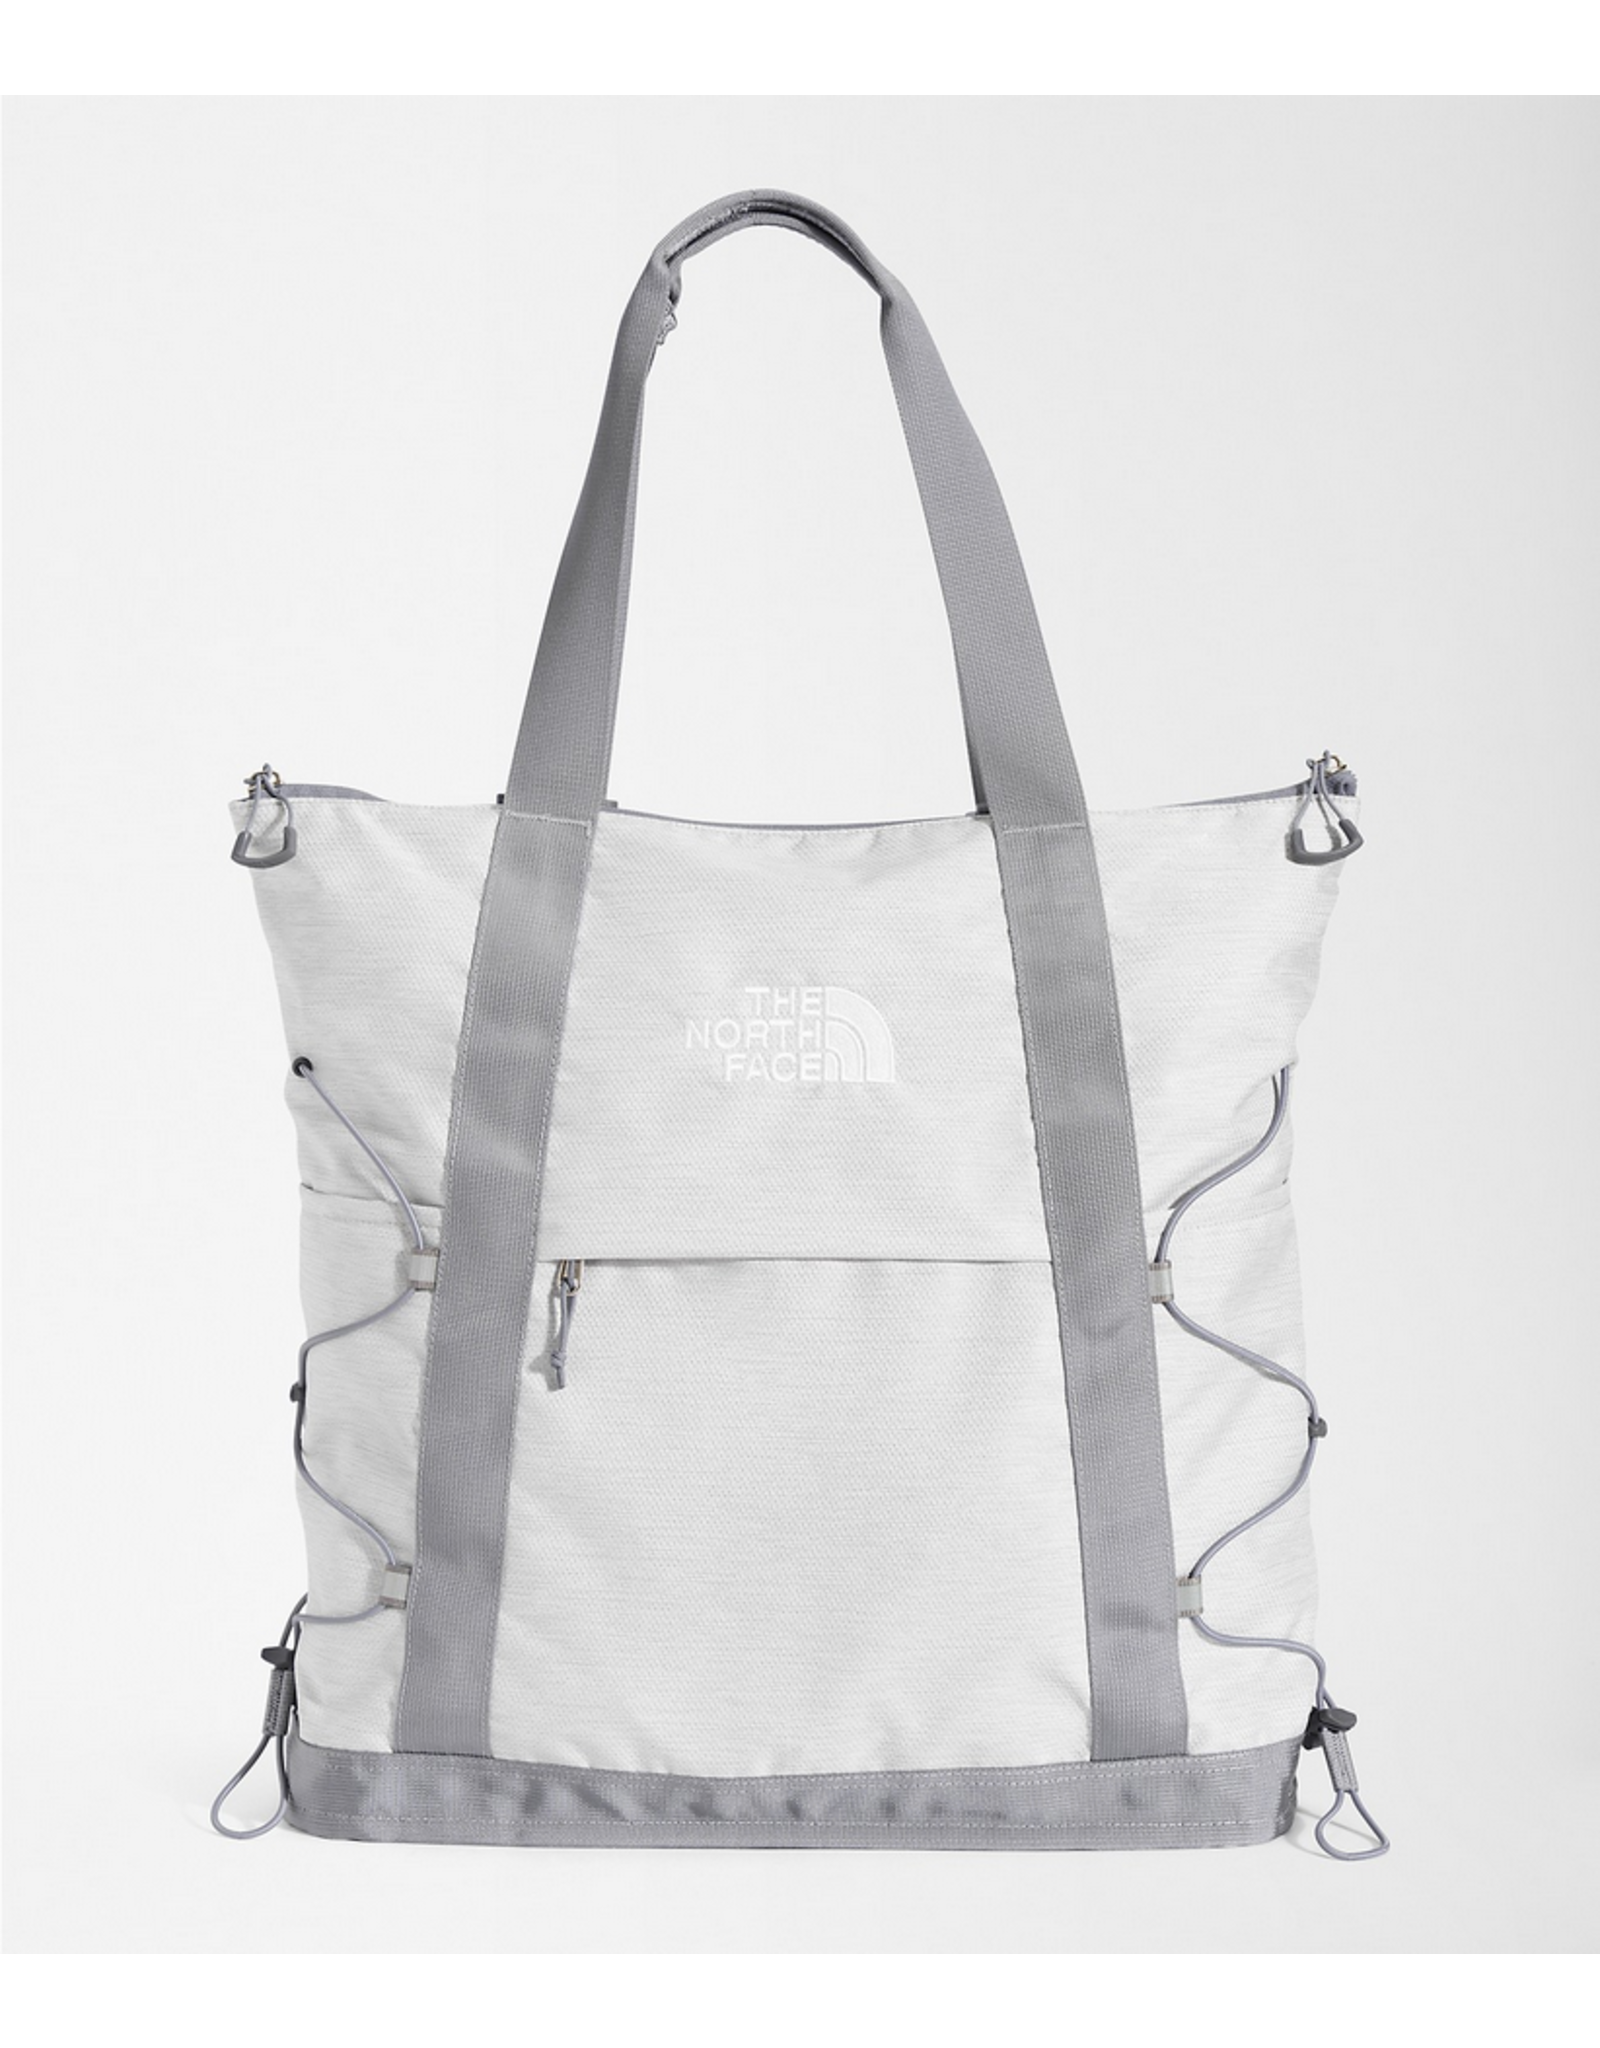 THE NORTH FACE W ISABELLA TOTE